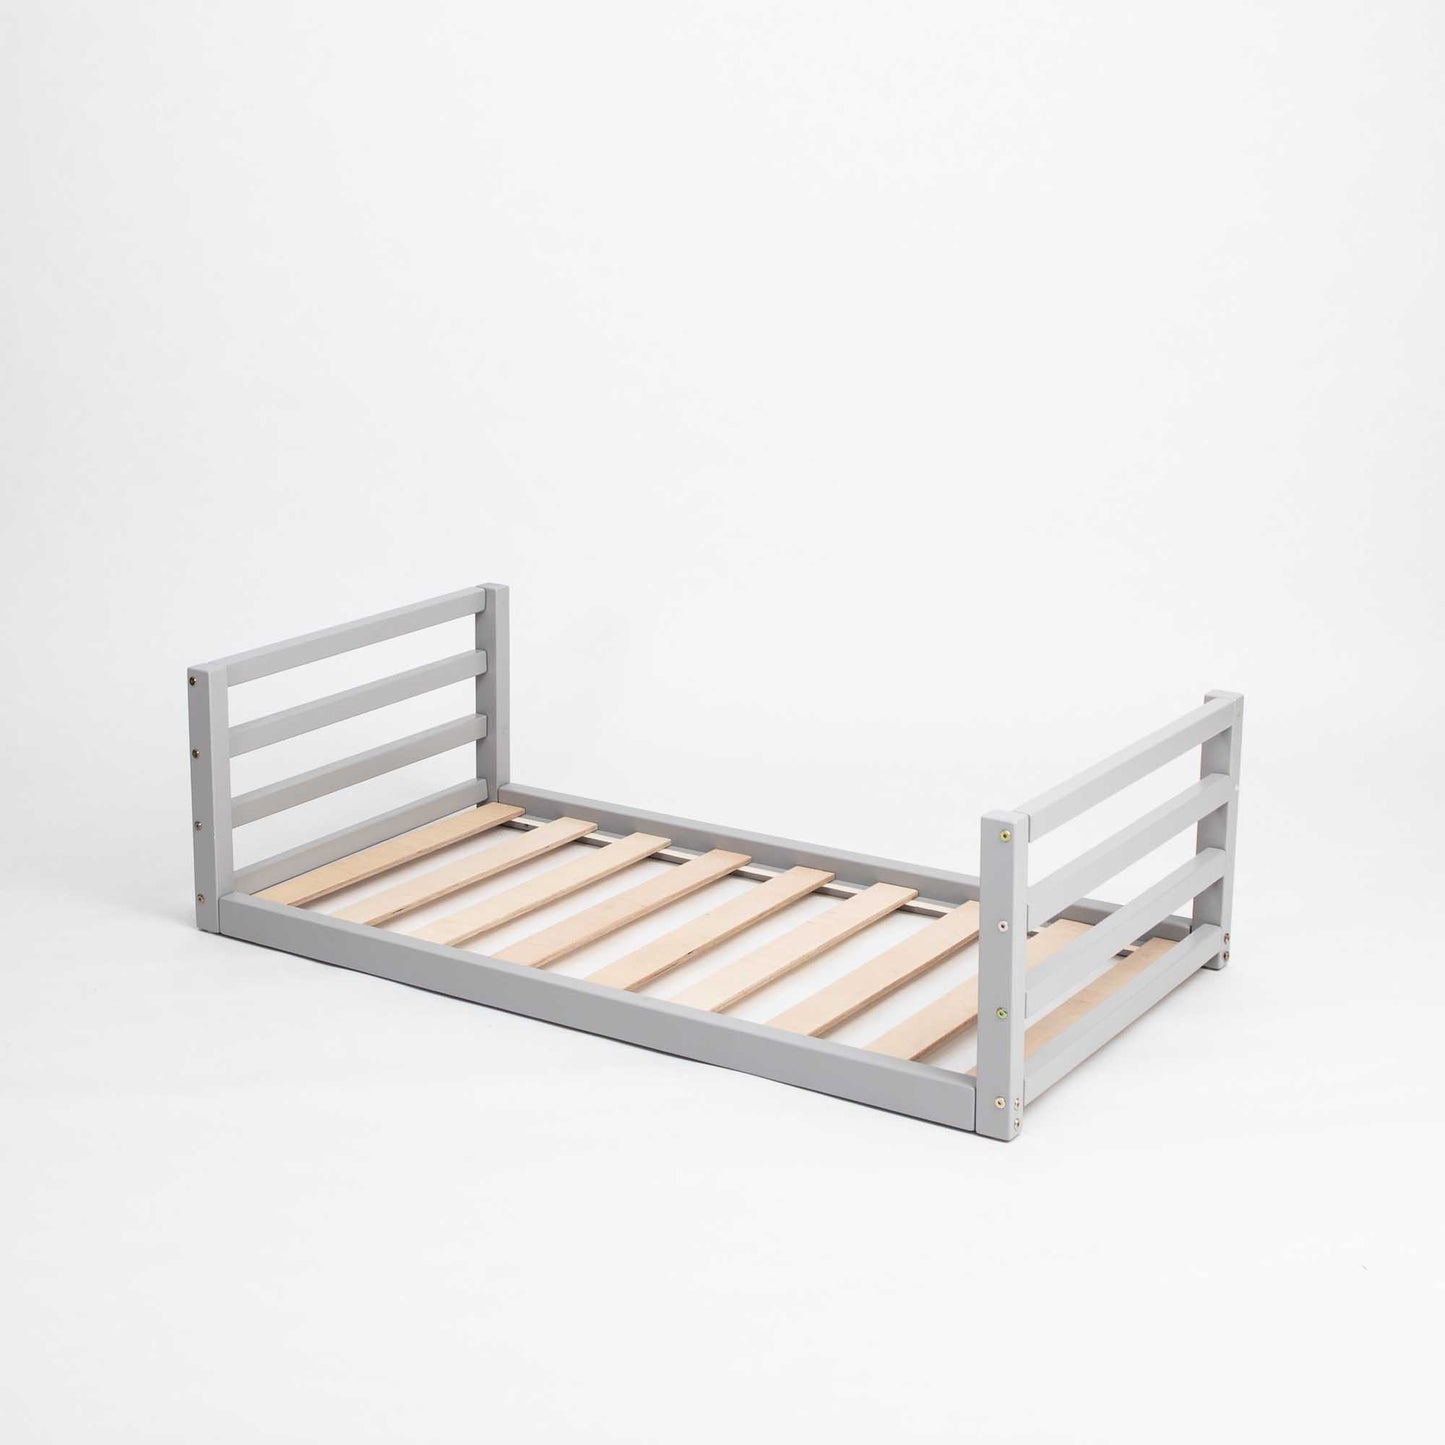 A long-lasting 2-in-1 kids' bed with a horizontal rail headboard and footboard on a white background, designed to grow with the child, from Sweet Home From Wood.